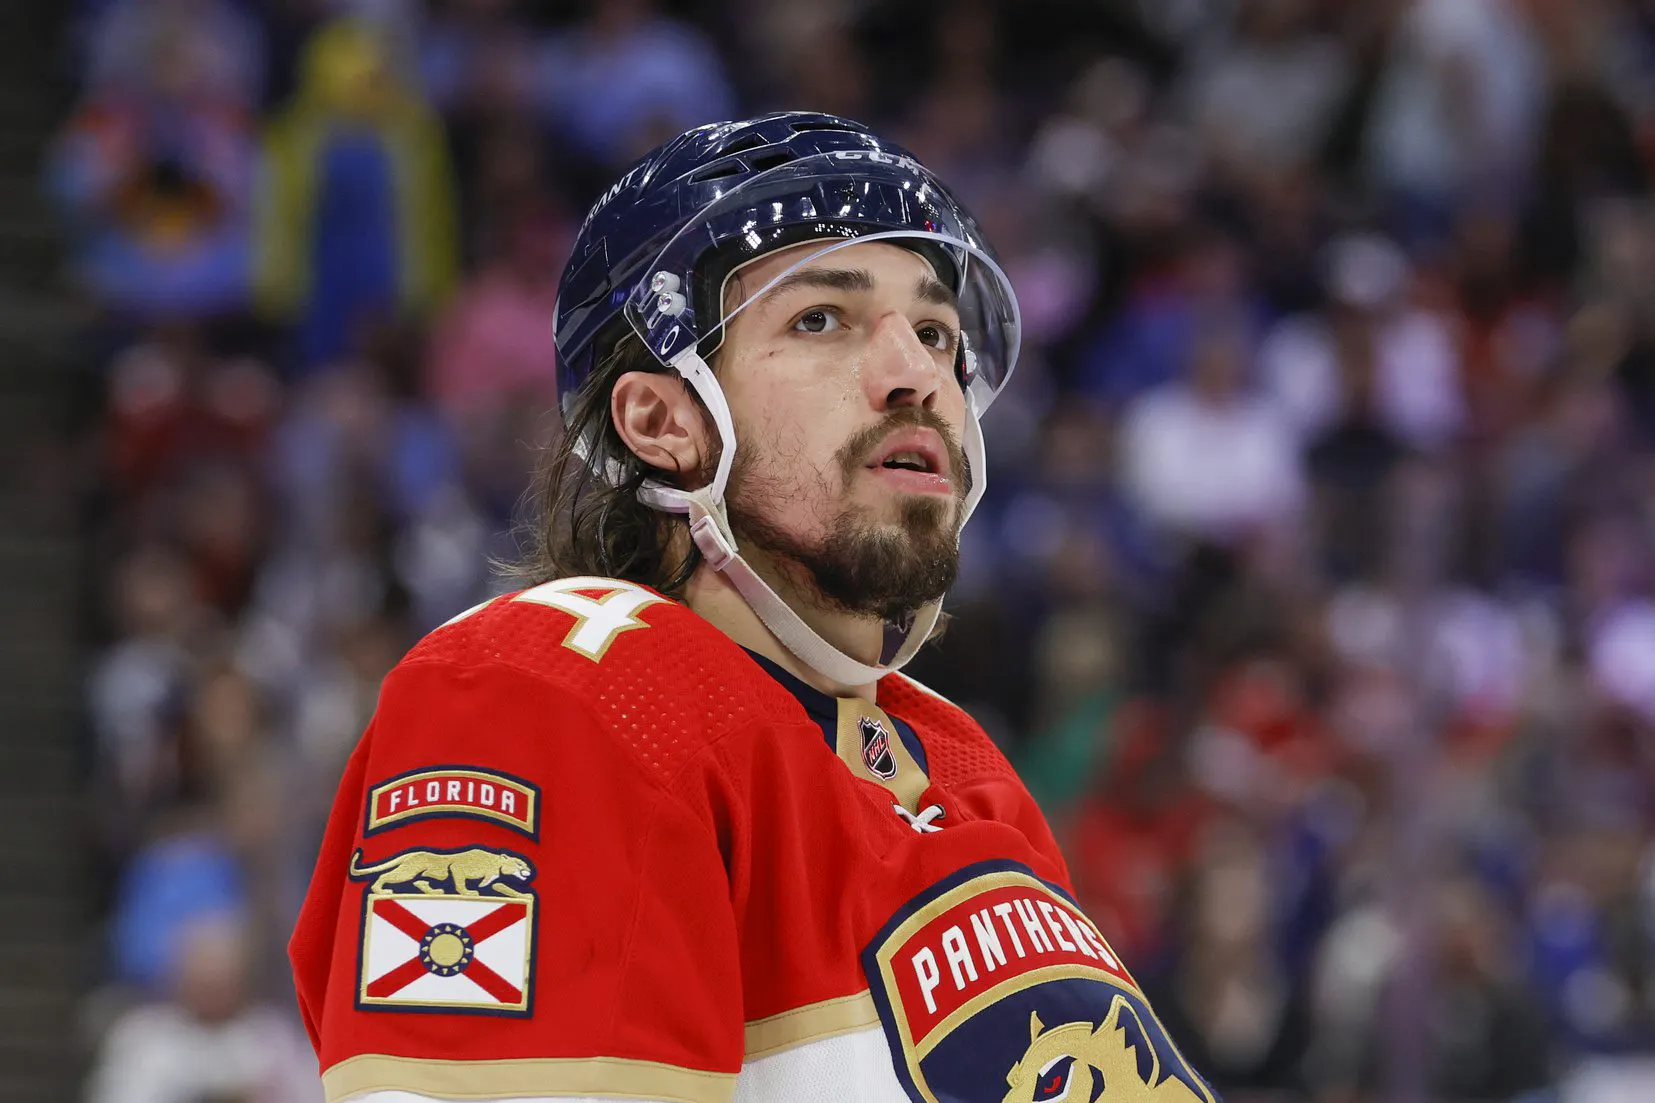 Florida Panthers’ Ryan Lomberg out for rest of series against Boston Bruins with upper-body injury